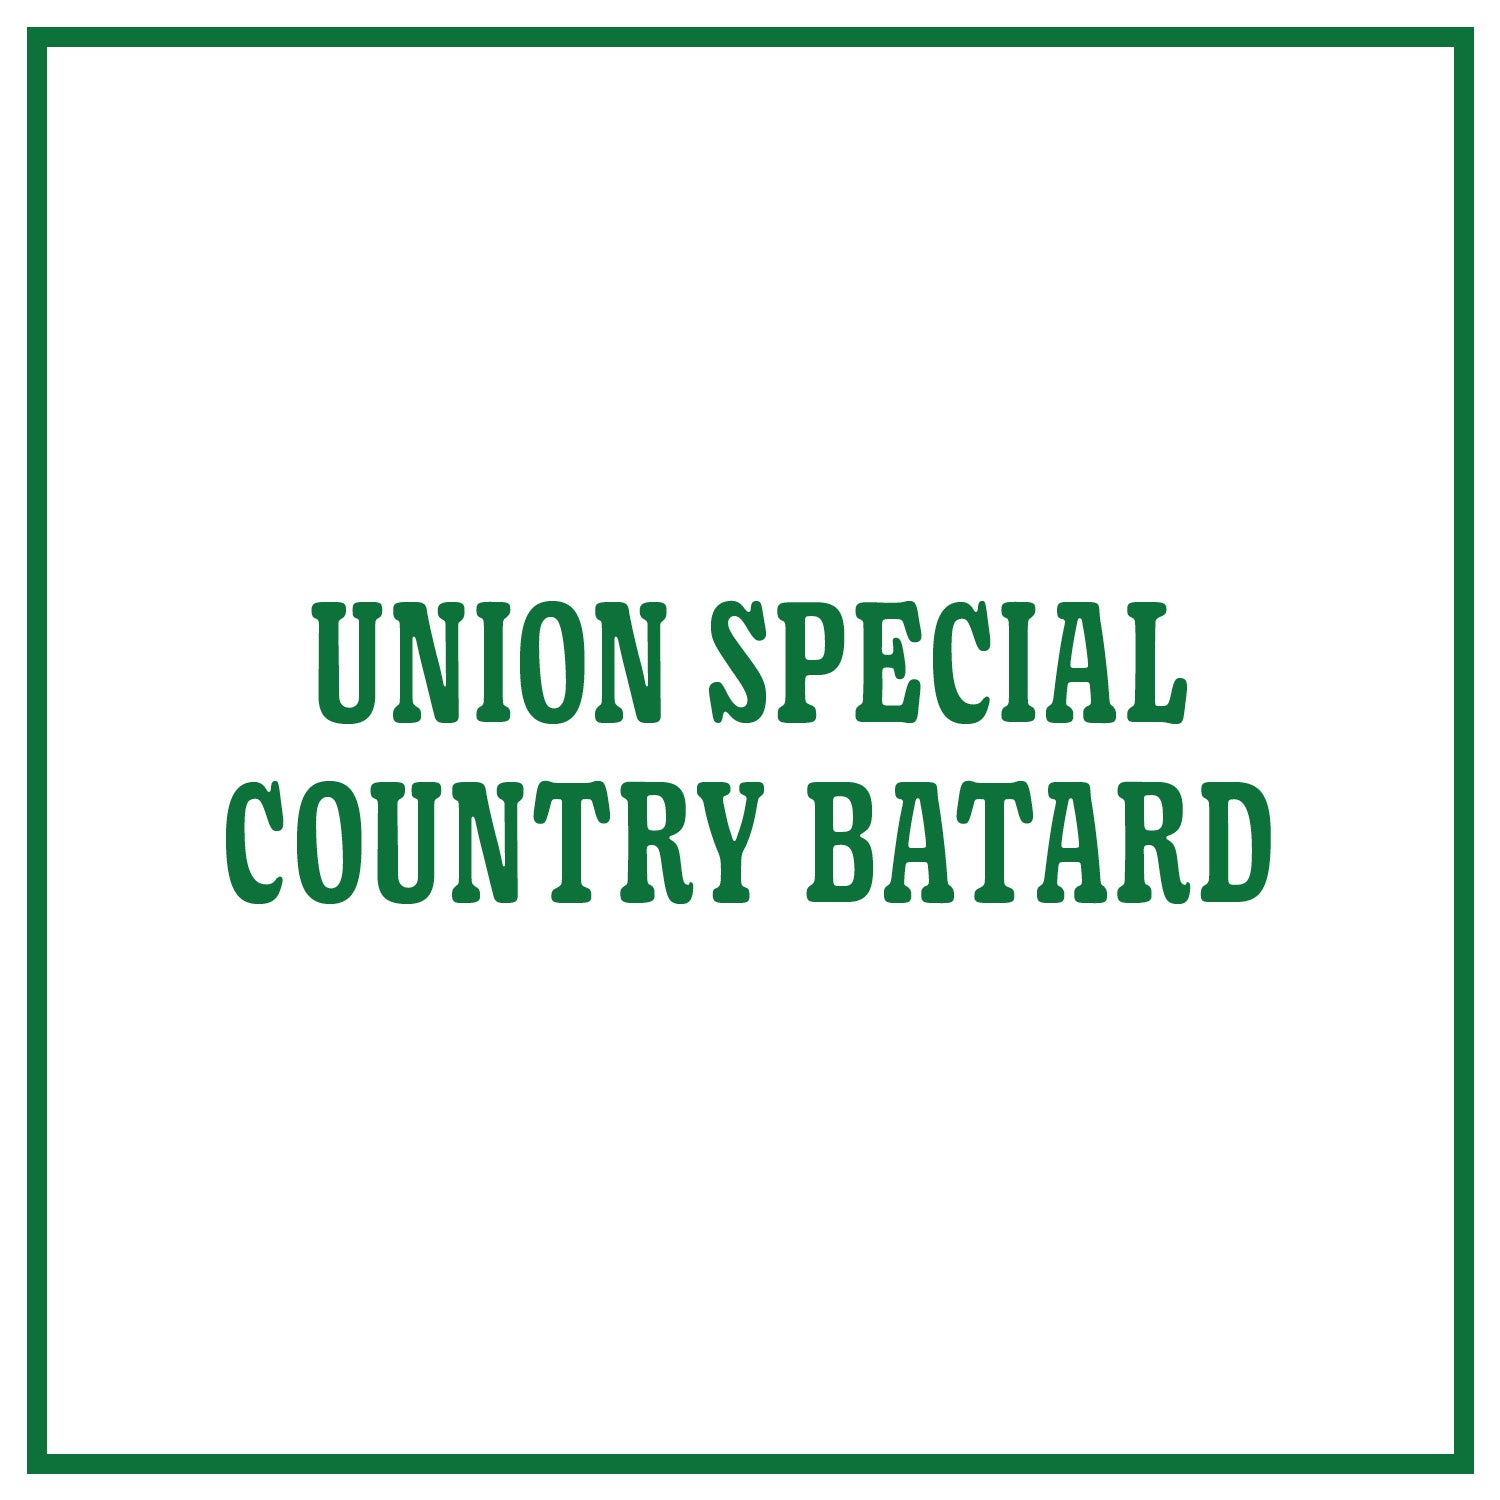 Union Special Country Batard